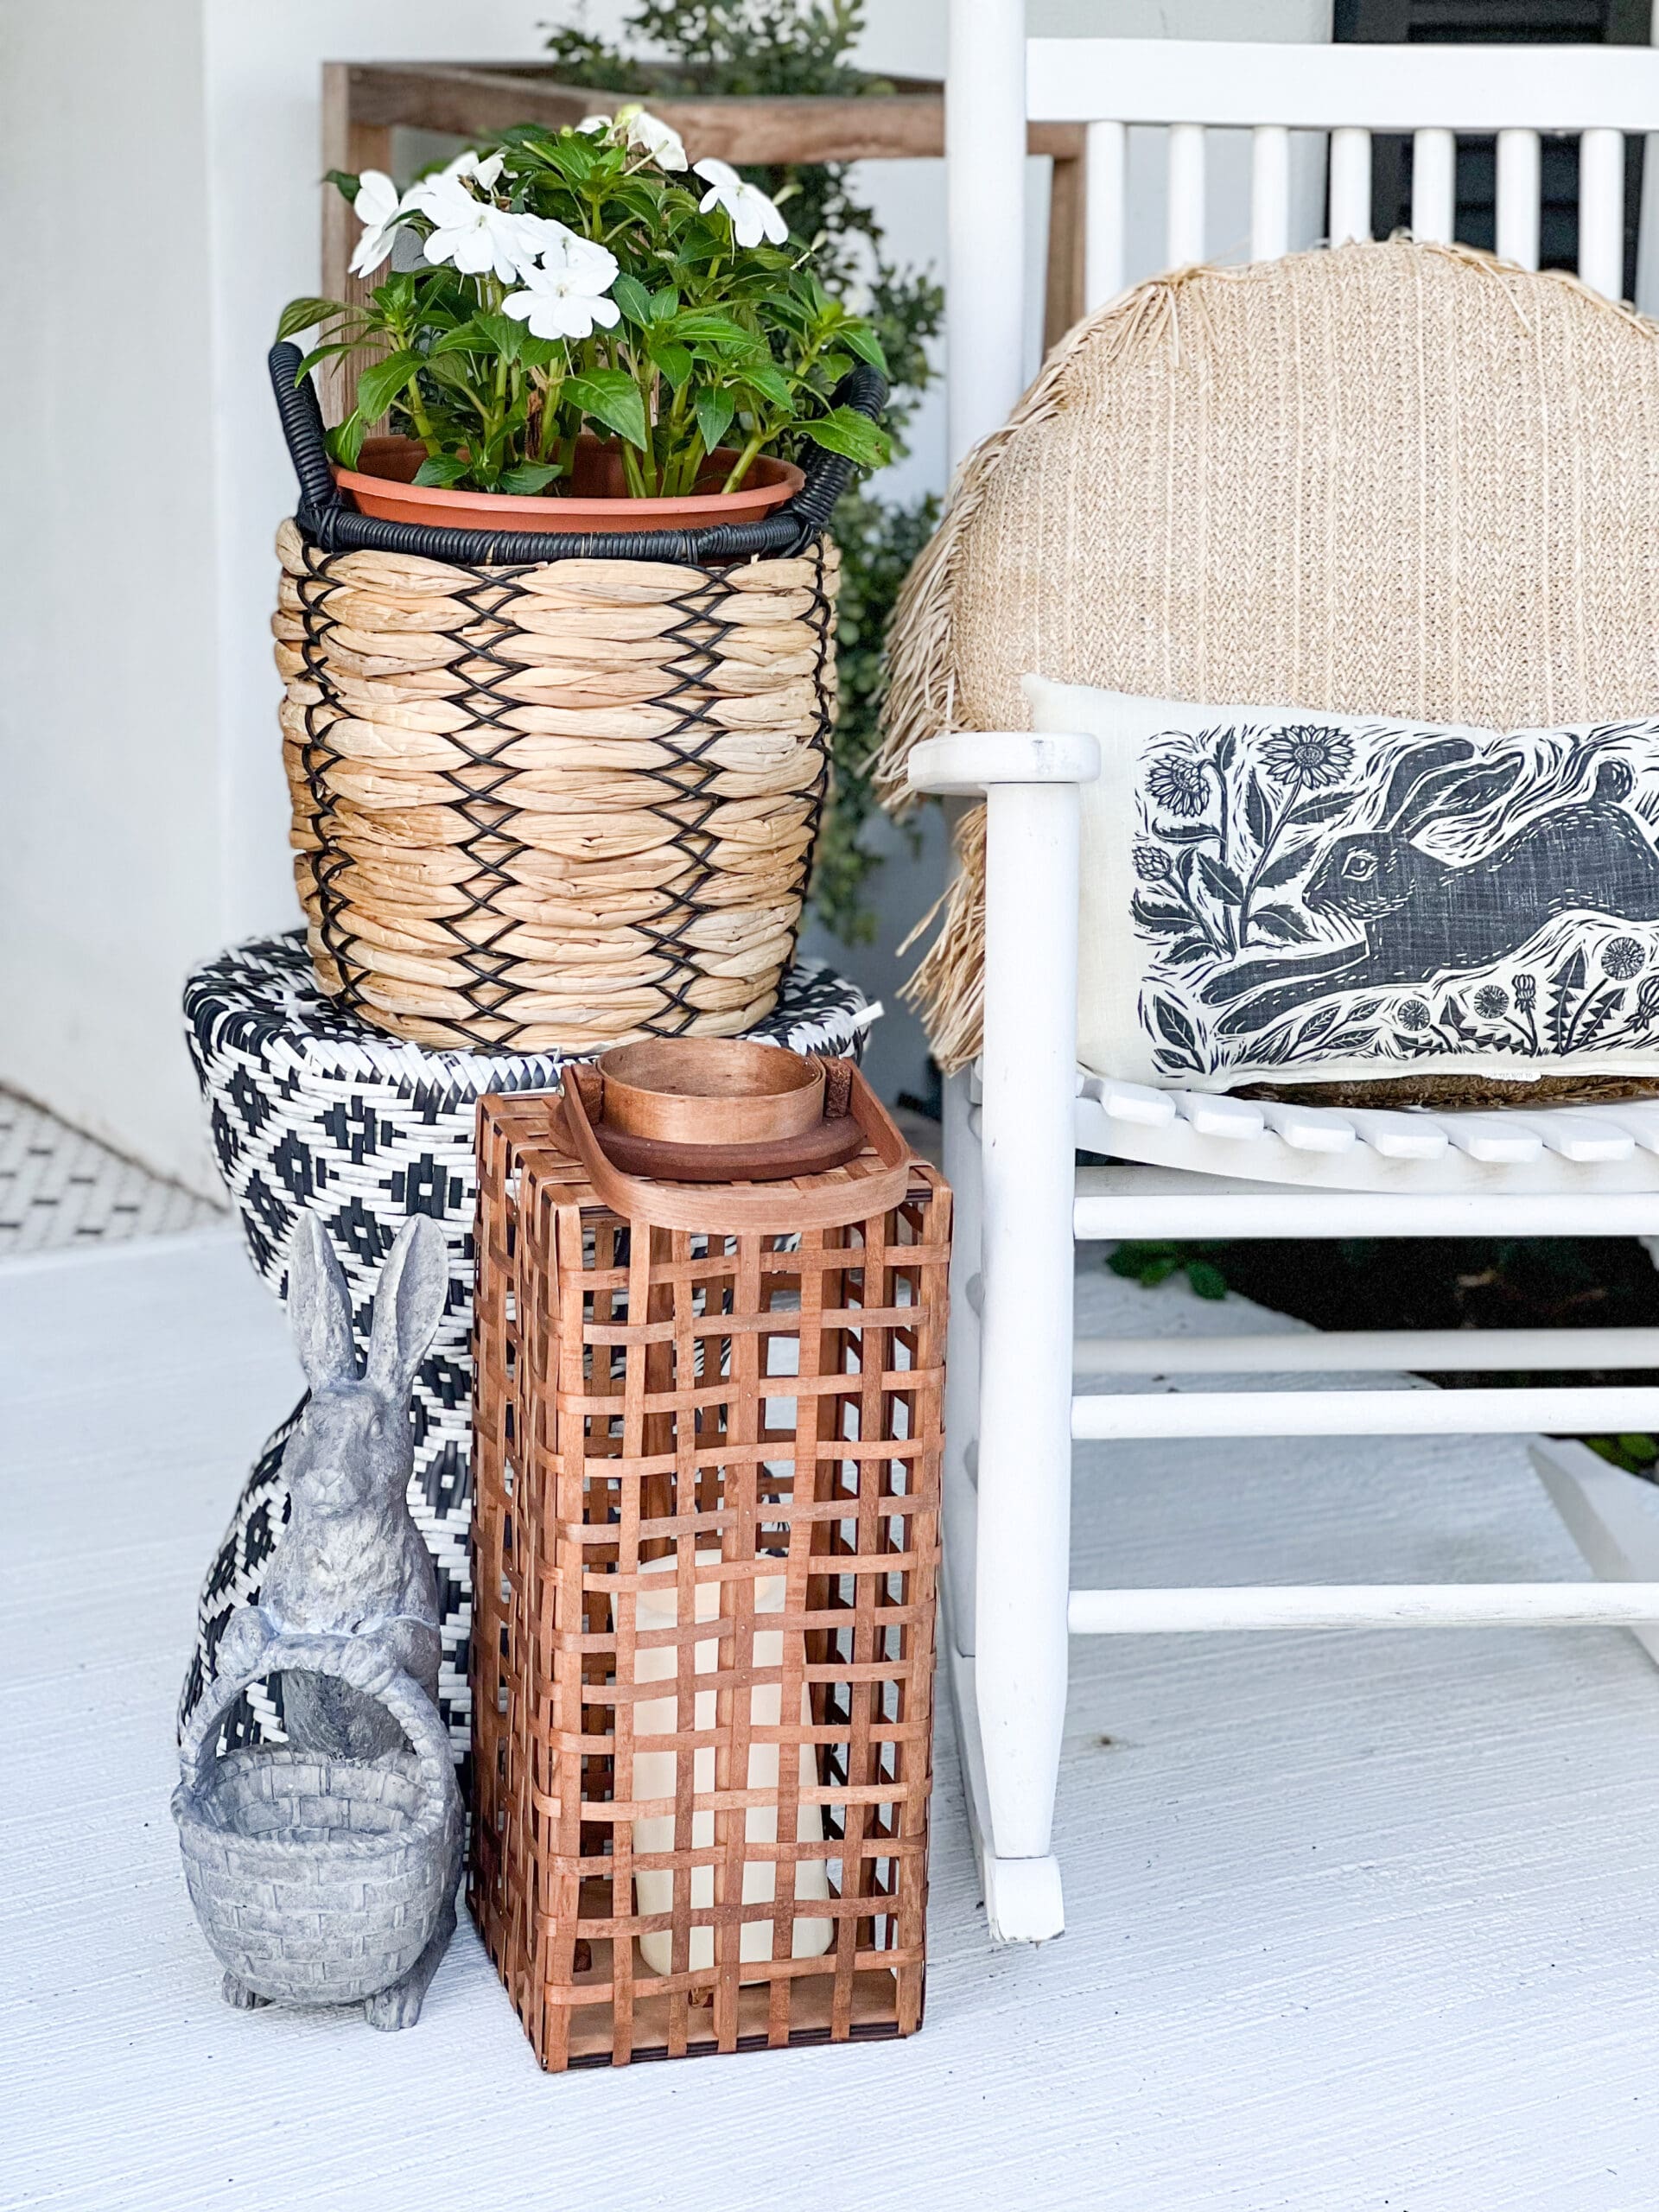 How to Paint Flower Pots for the Porch - Amy Sadler Designs